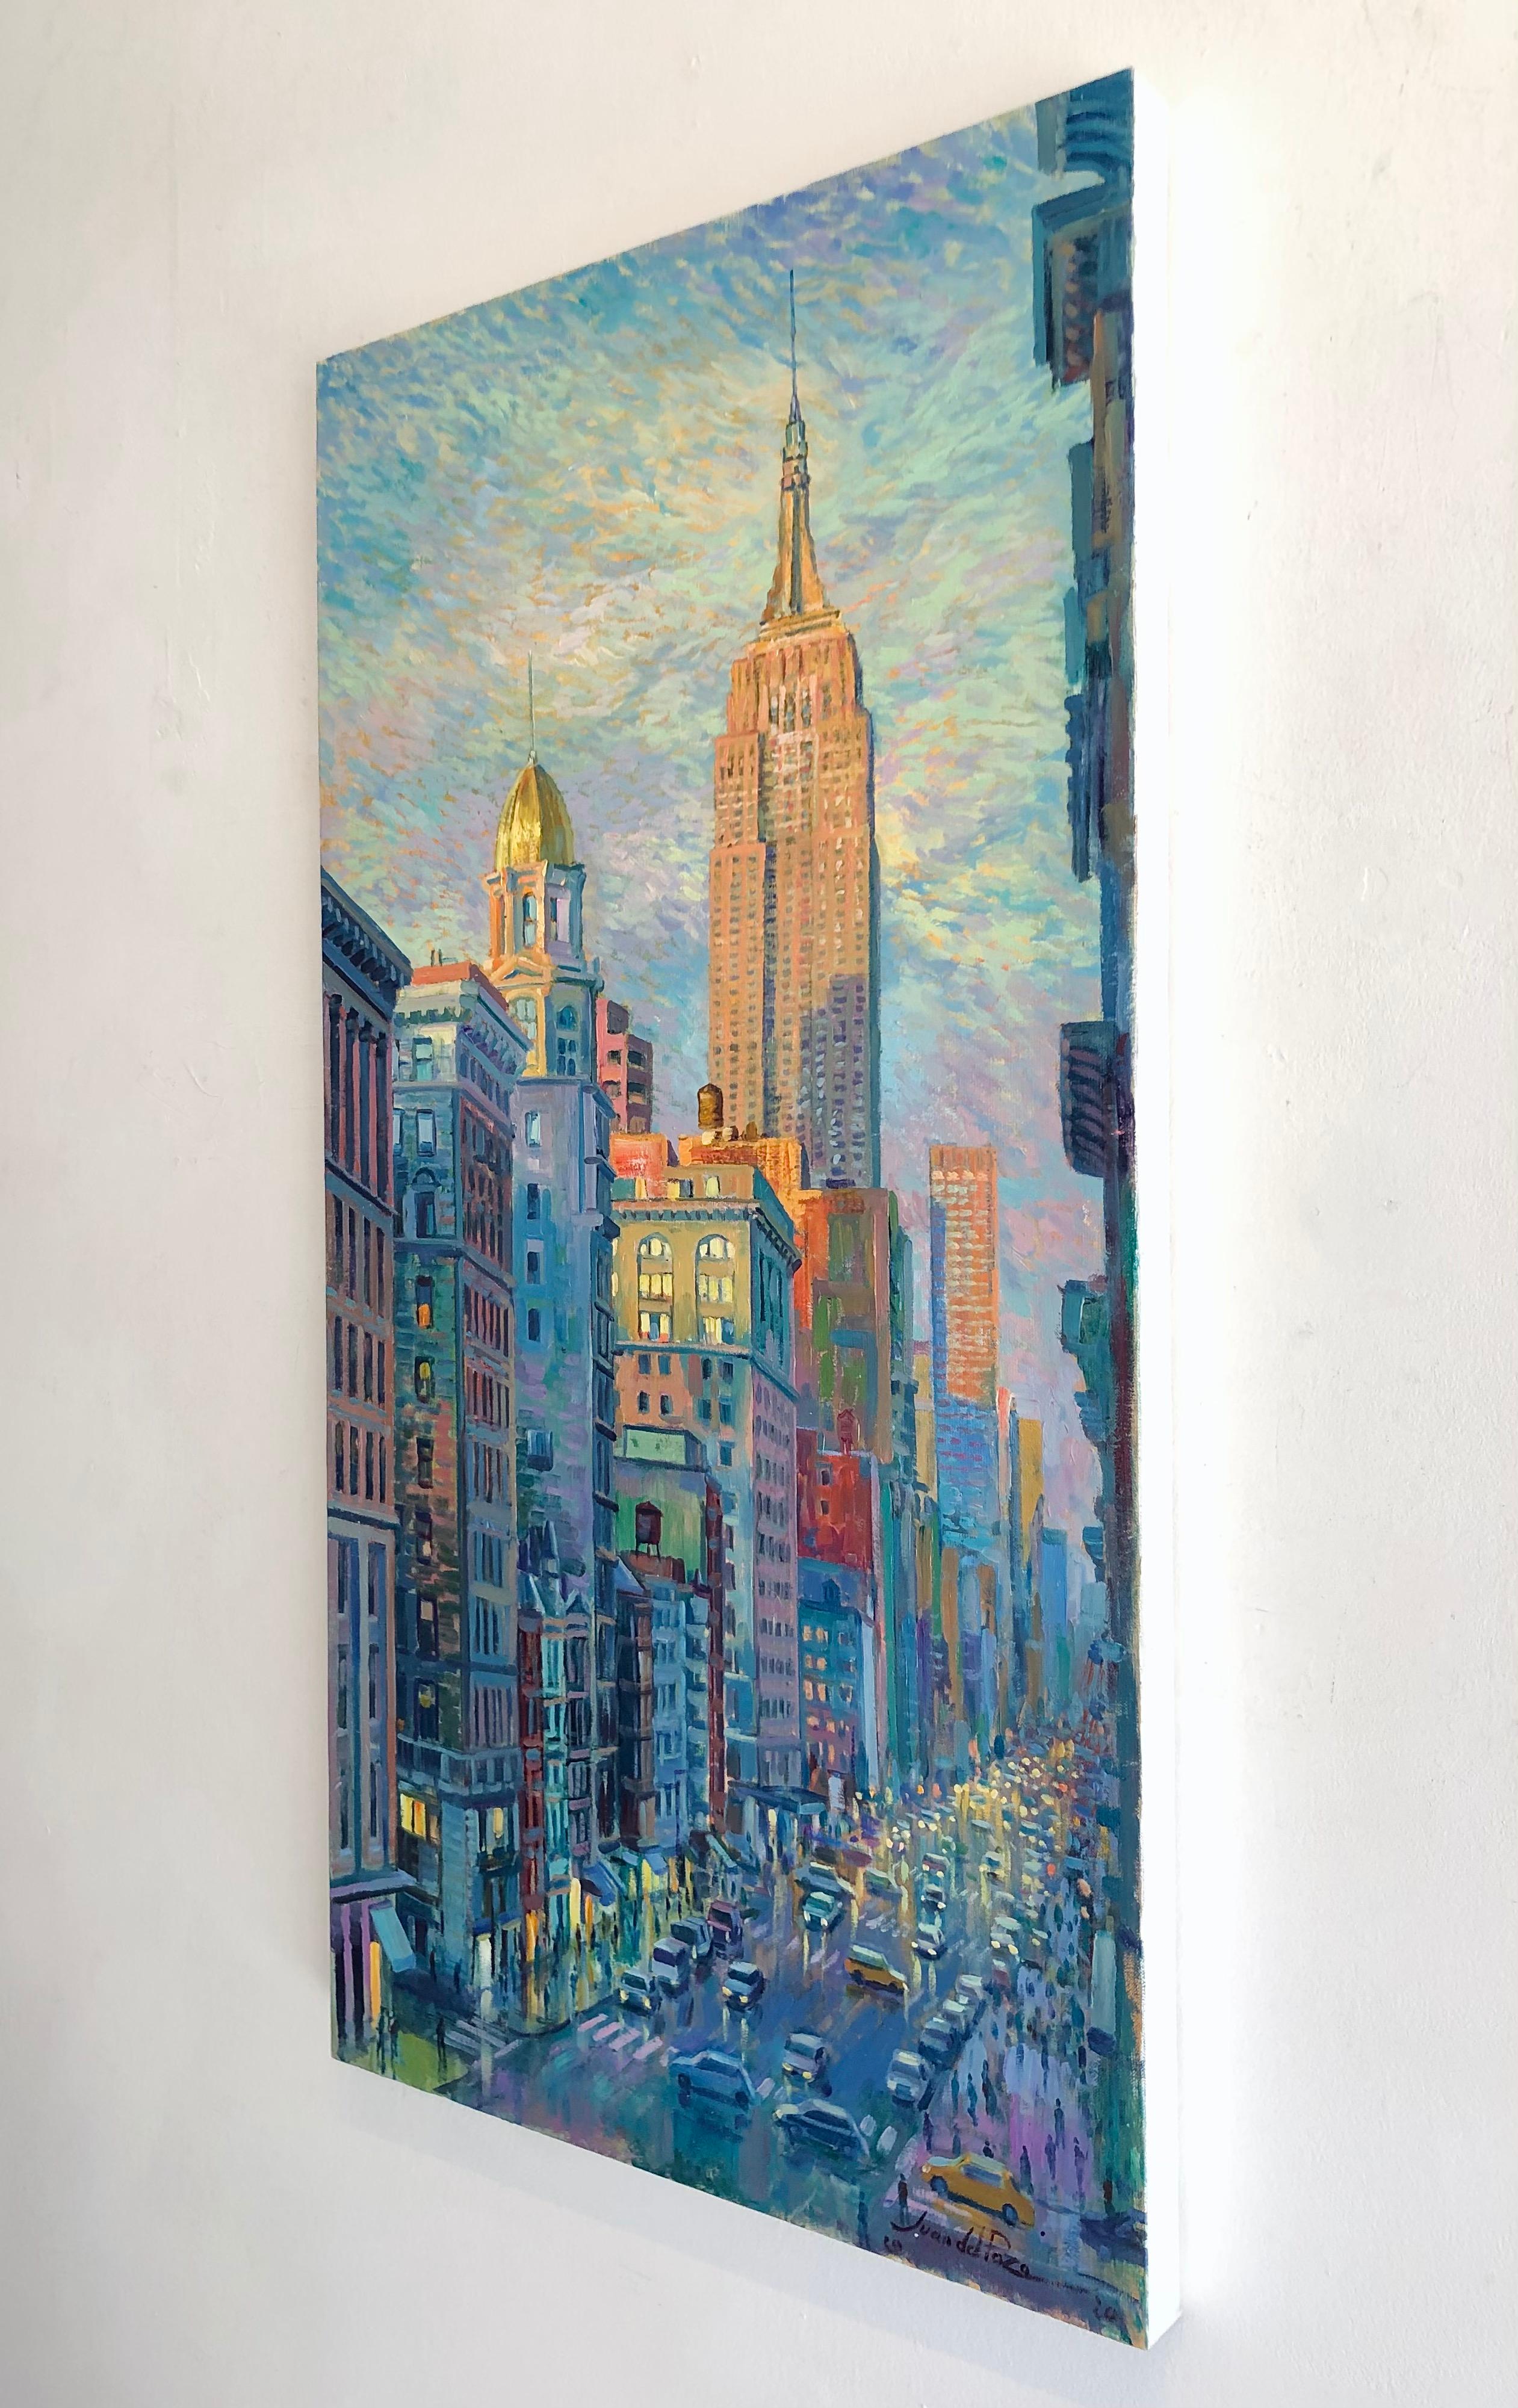 Empire State Street-original impressionism cityscape oil painting-modern Art - Post-Impressionist Painting by Juan del Pozo